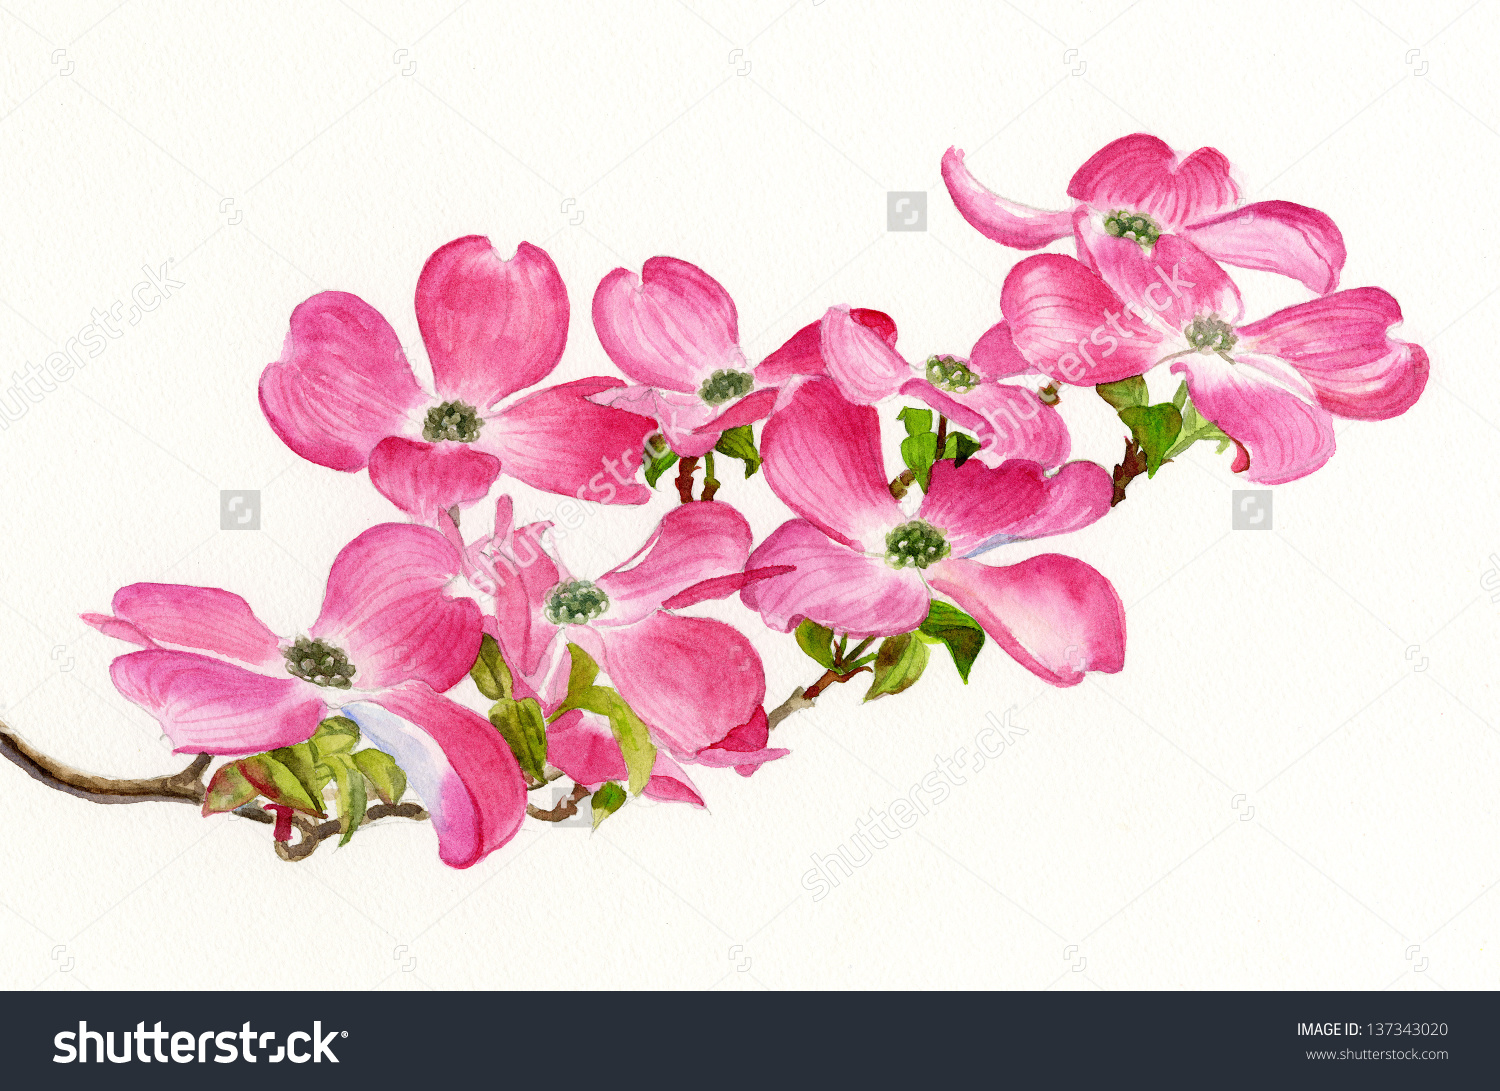 Save to a lightbox - Dogwood Clipart